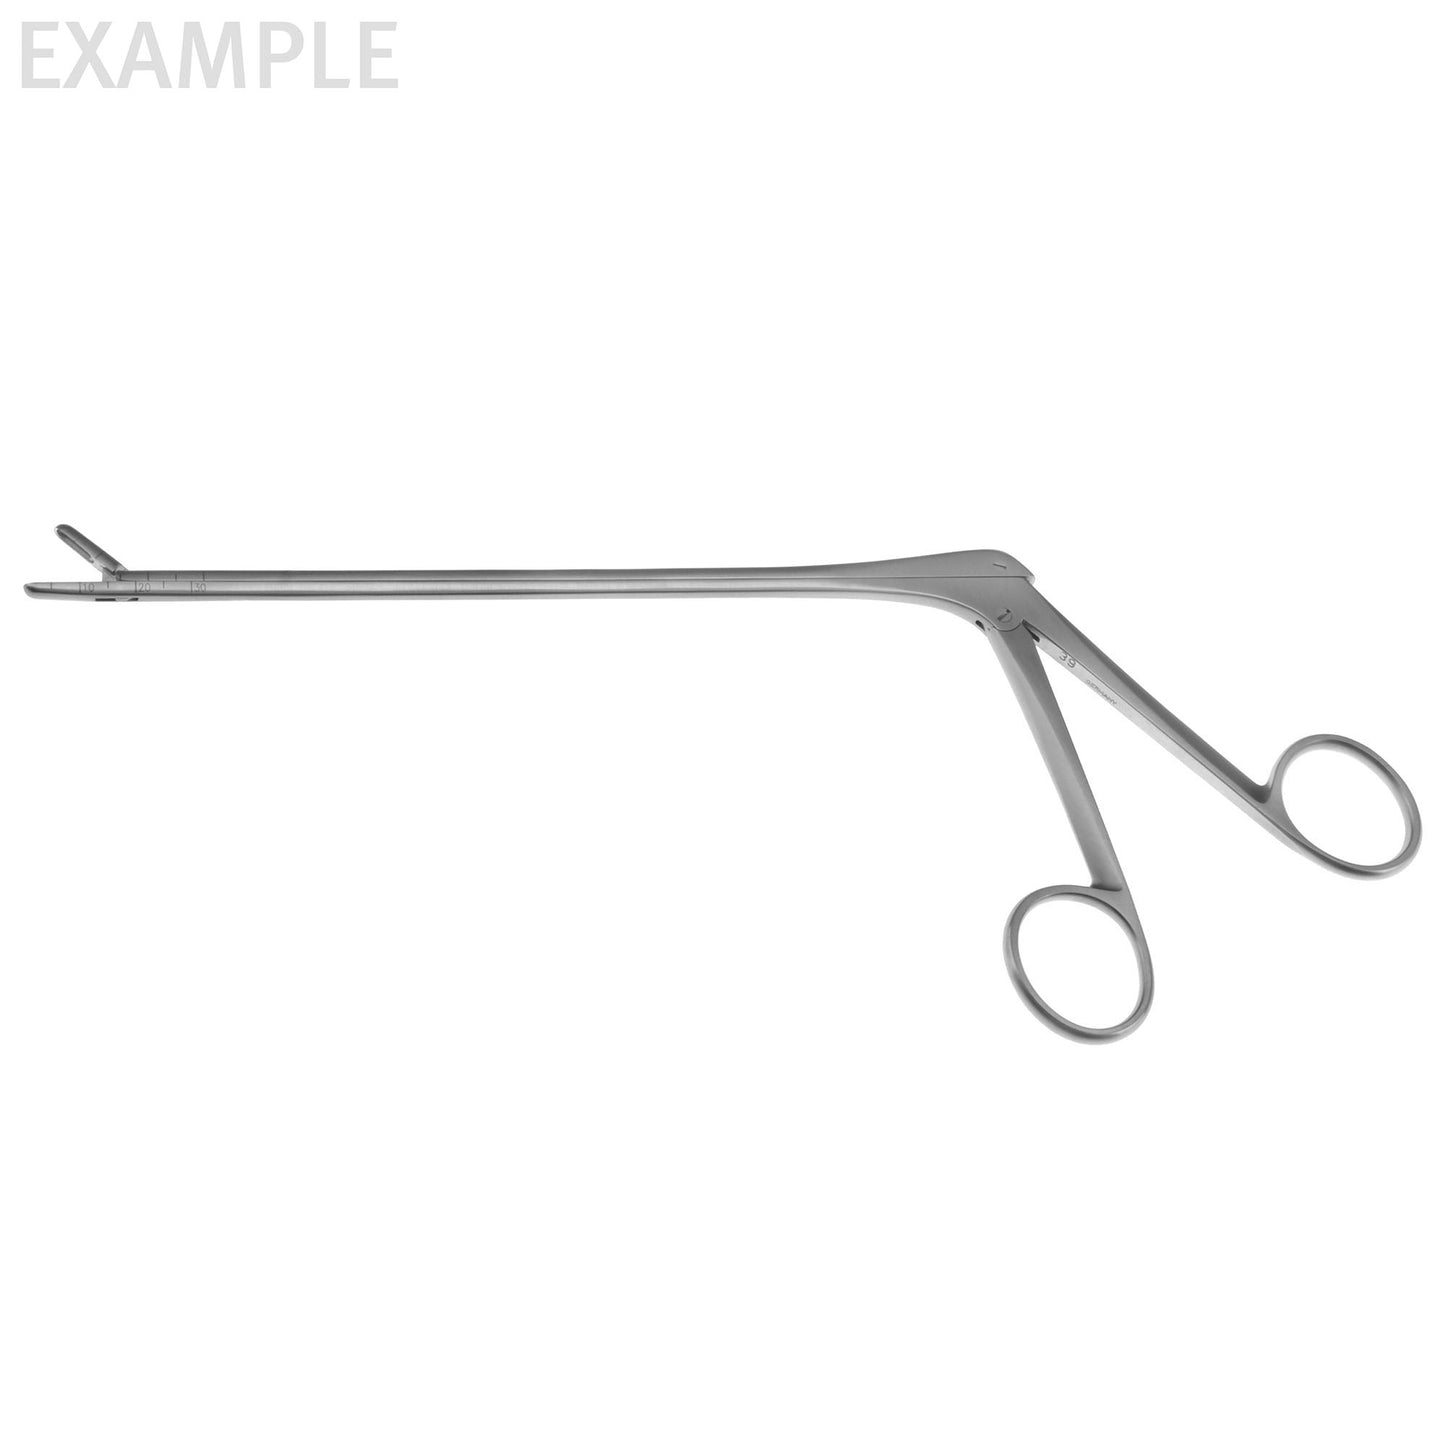 MIS Pituitary Rongeur, upbite, graduated 4mm jaw, 7 1/4&#8243;